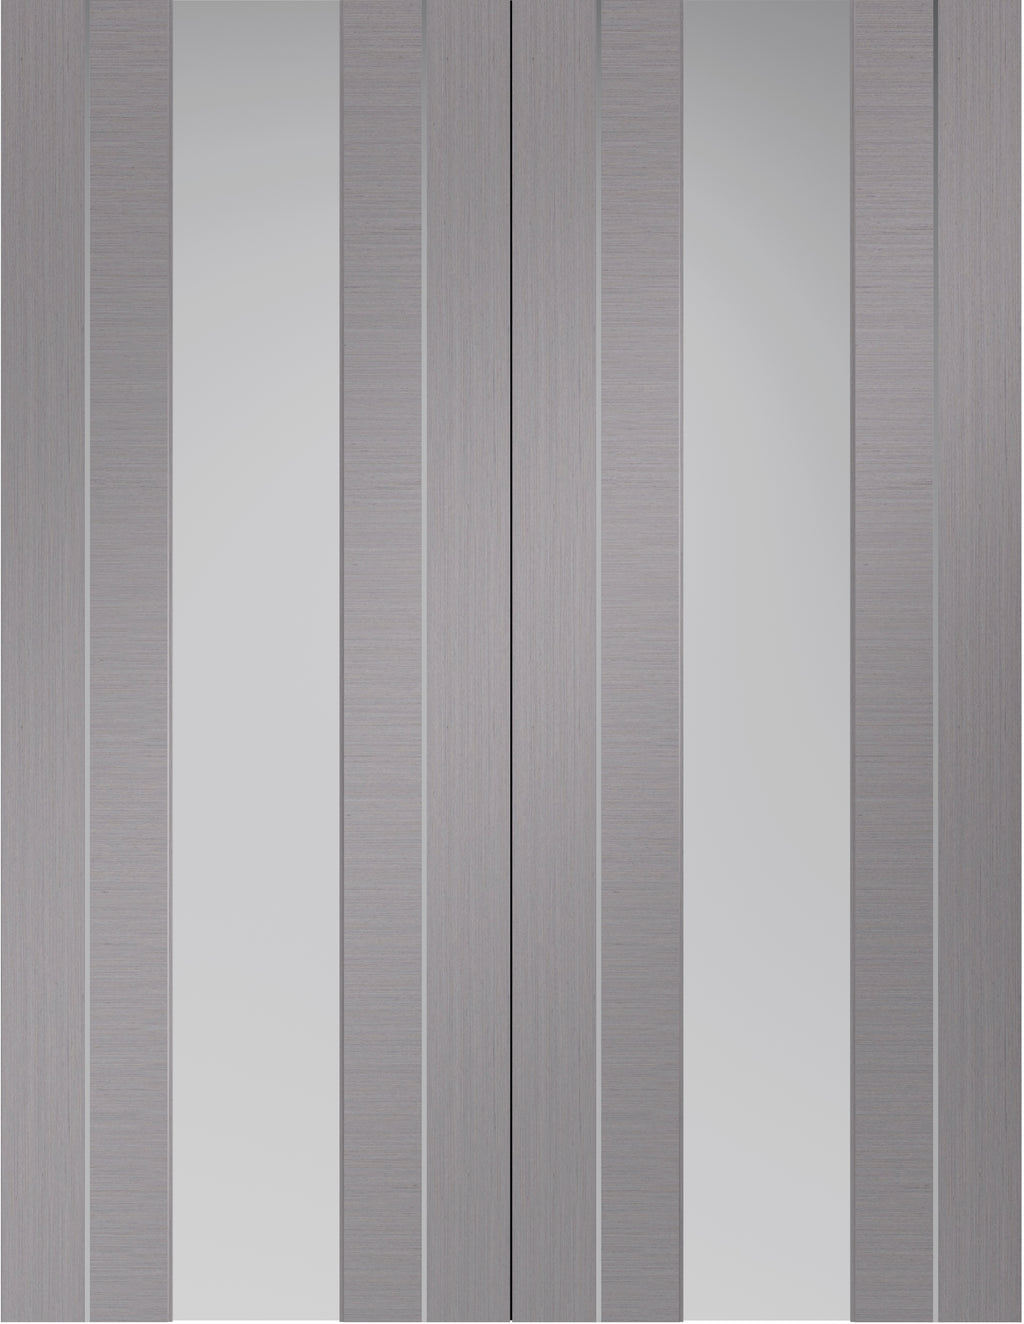 Forli light grey internal pair with aluminium inlays and clear glass